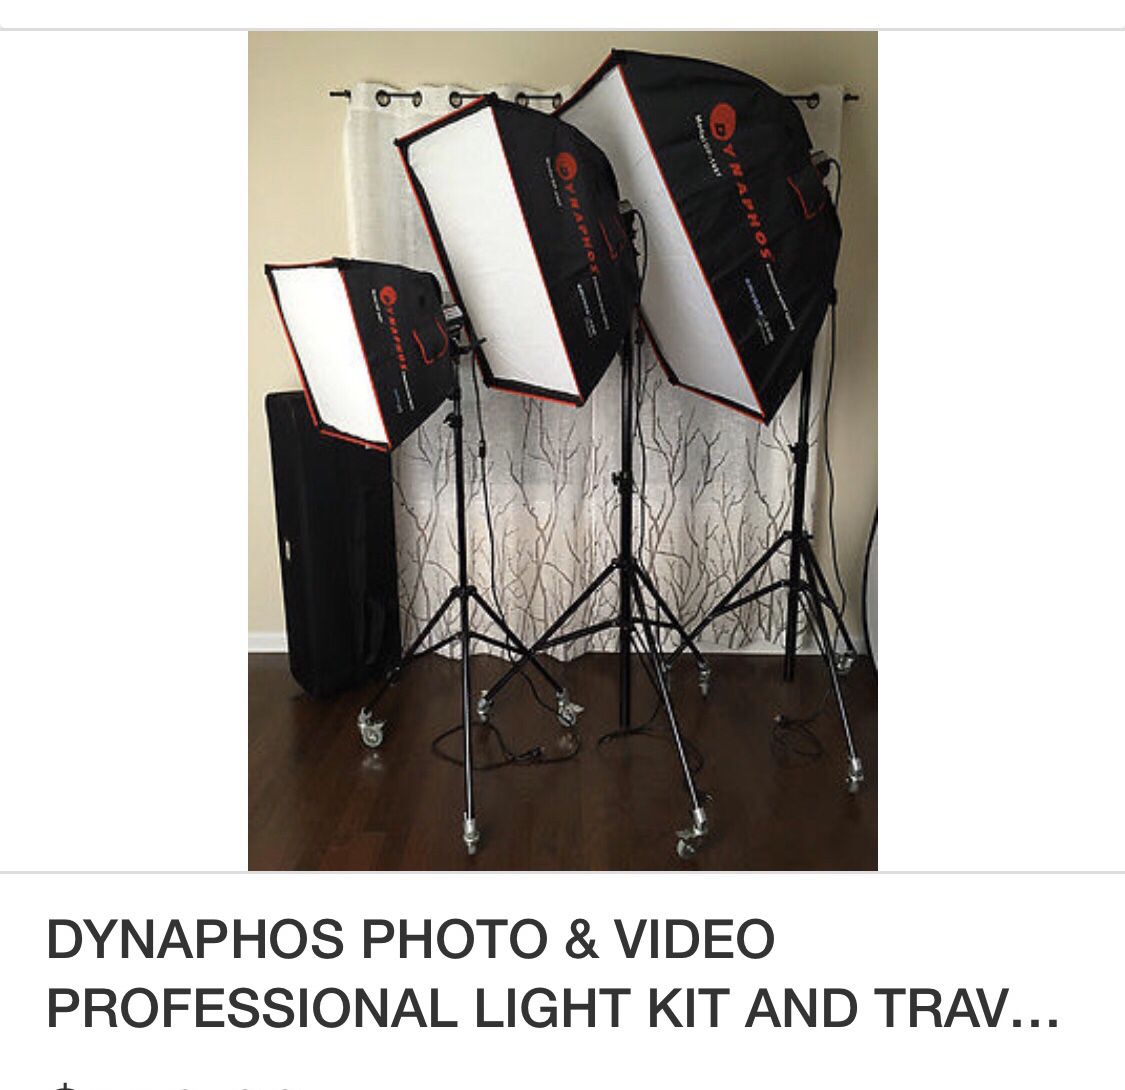 DYNAPHOS PHOTO & VIDEO PROFESSIONAL LIGHT KIT WITH TRAVEL BAG. “MAKE OFFER”